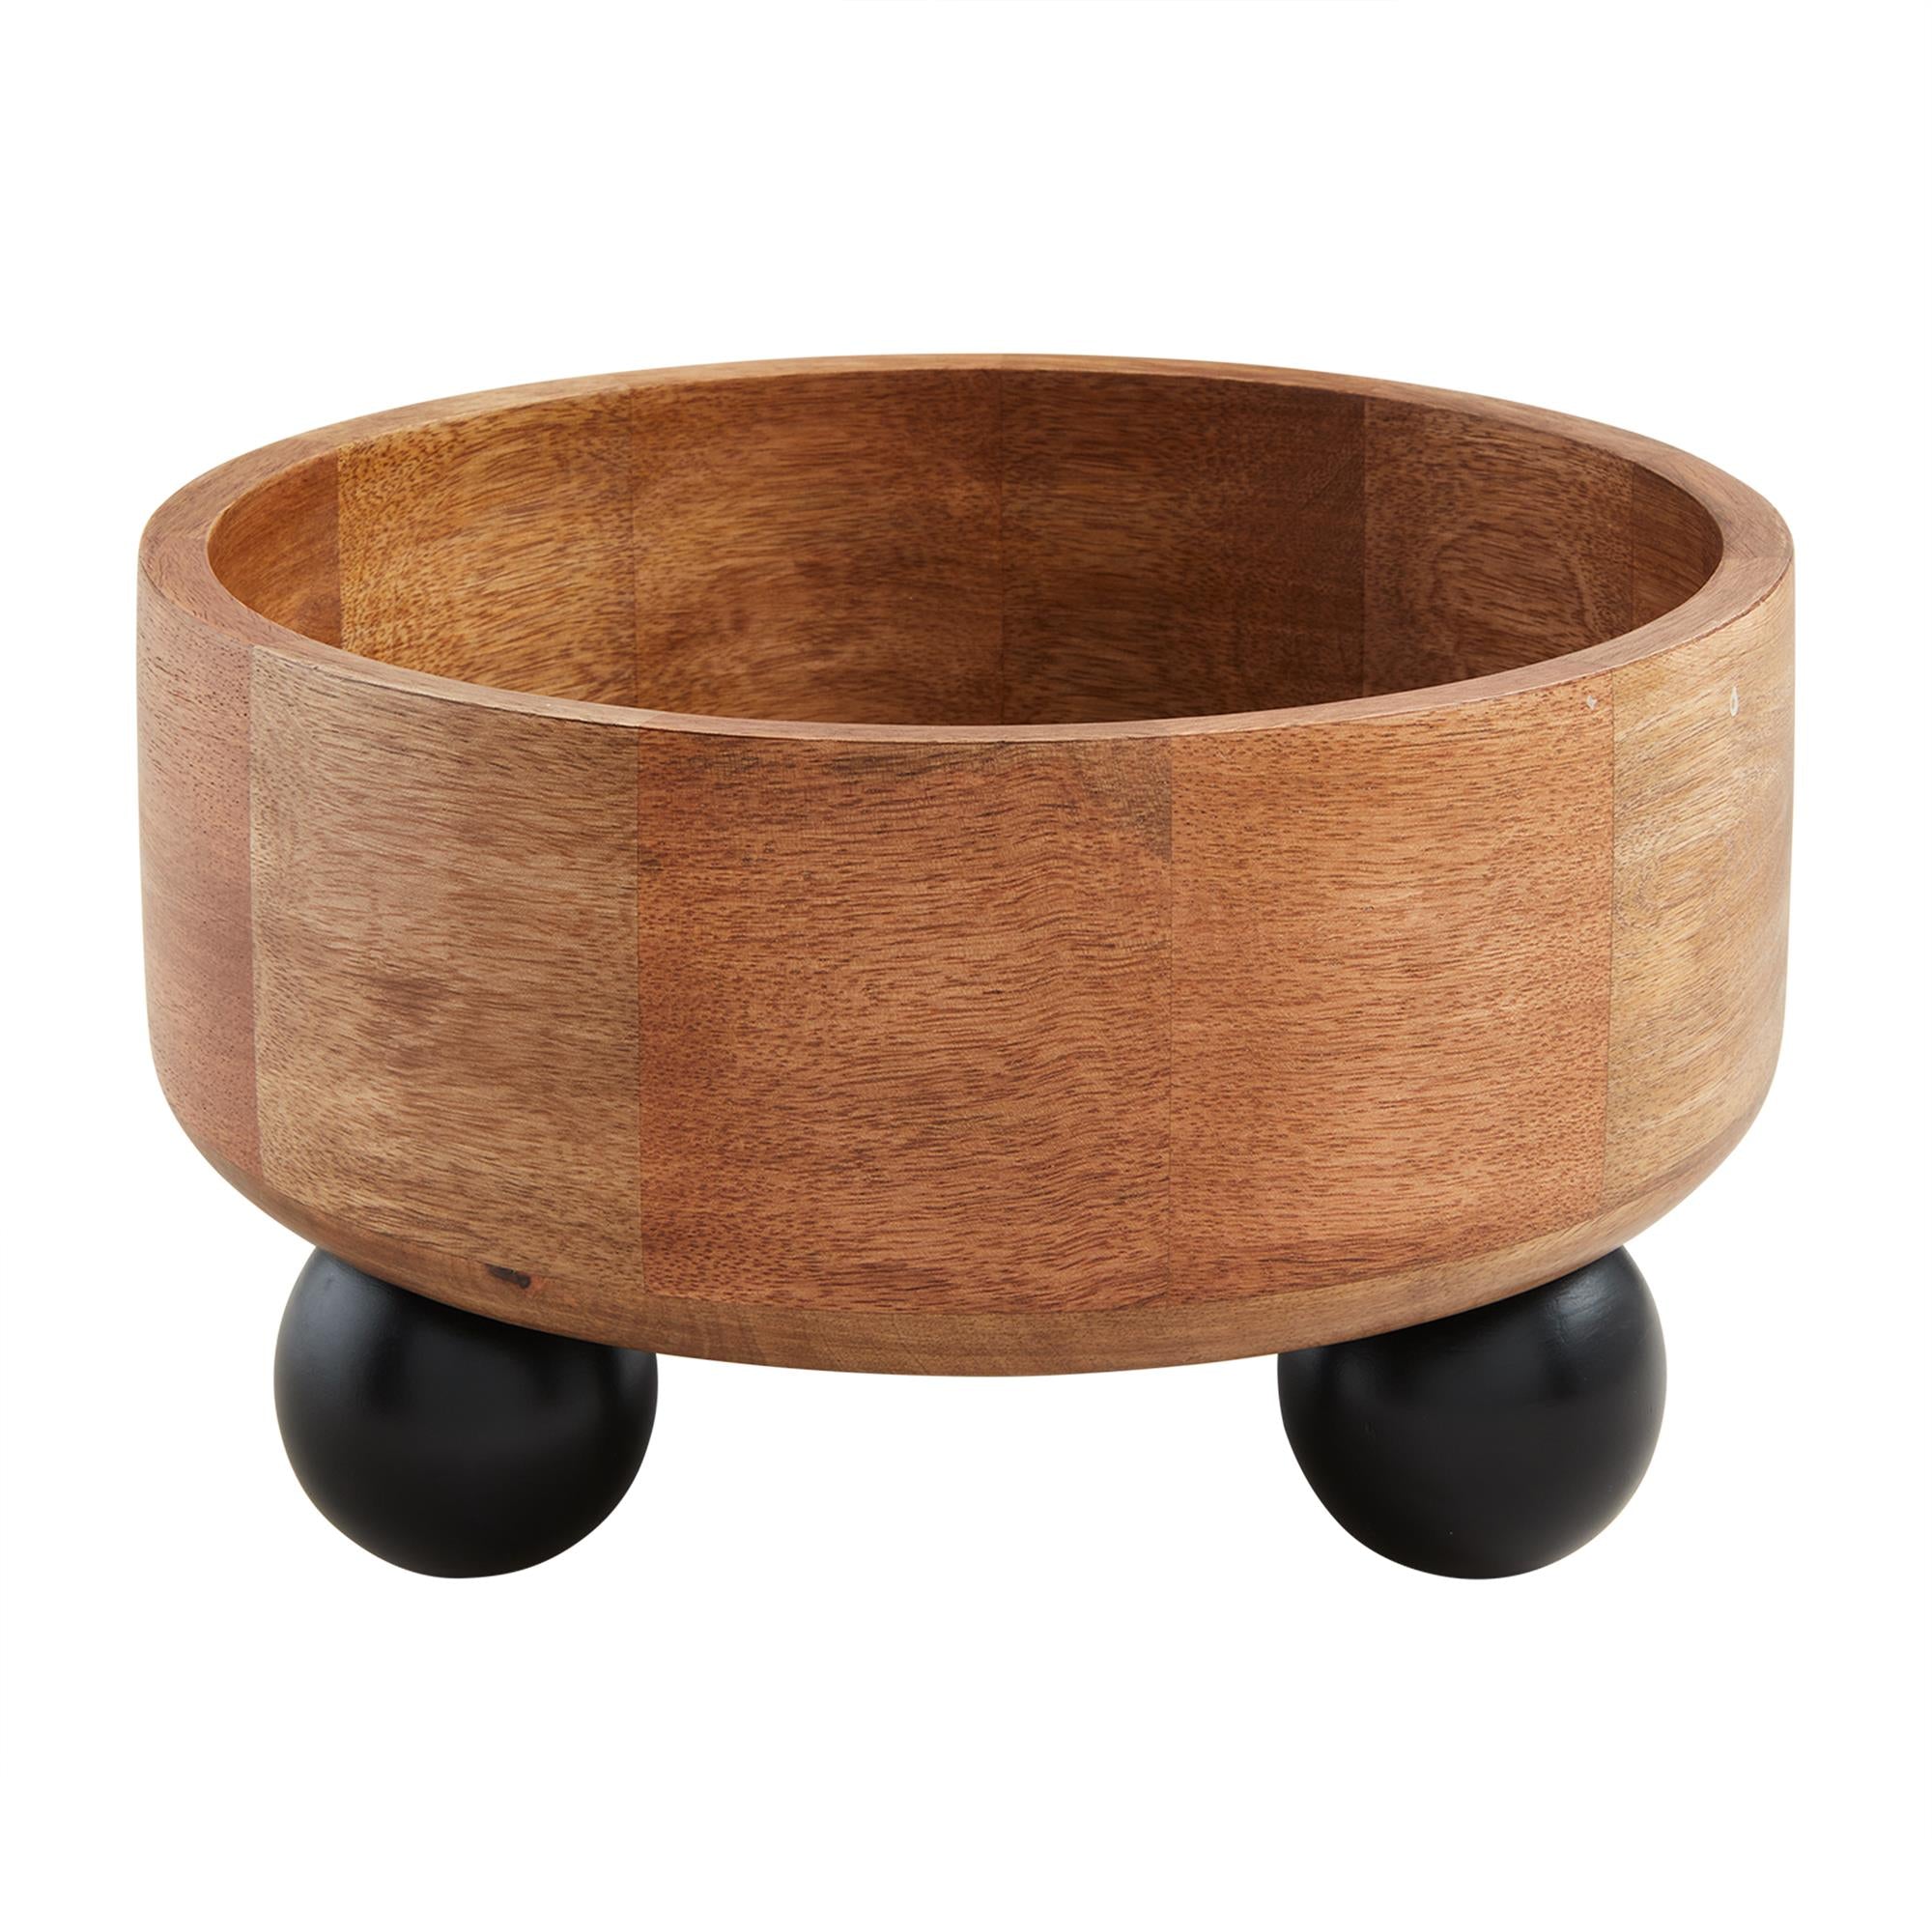 Bead Footed Bowl